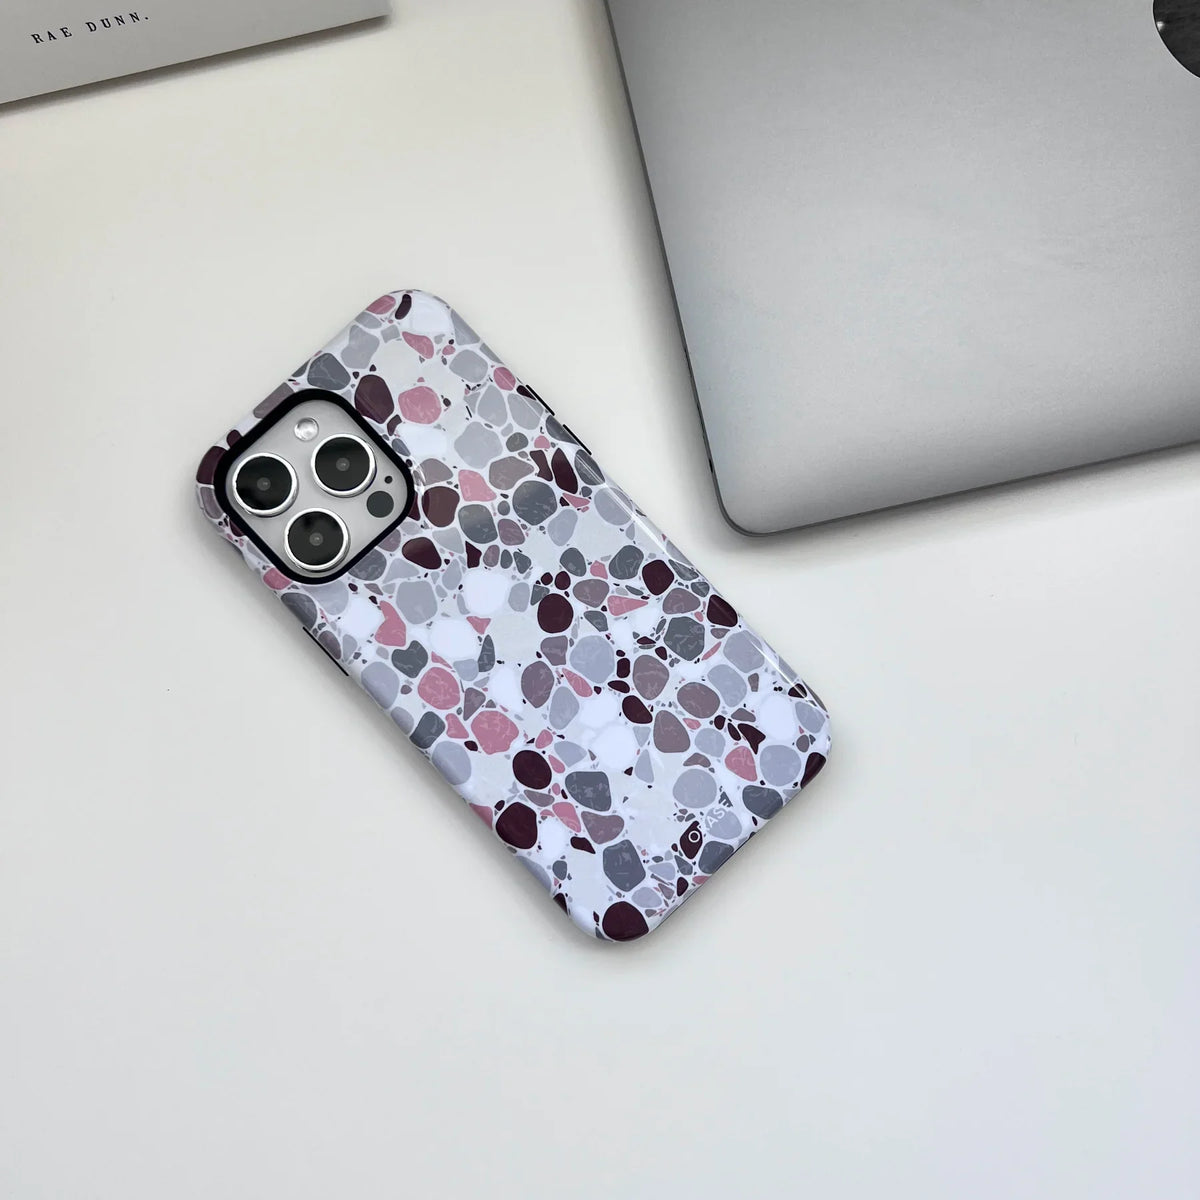 Stone Mosaic iPhone Case - Select a Device